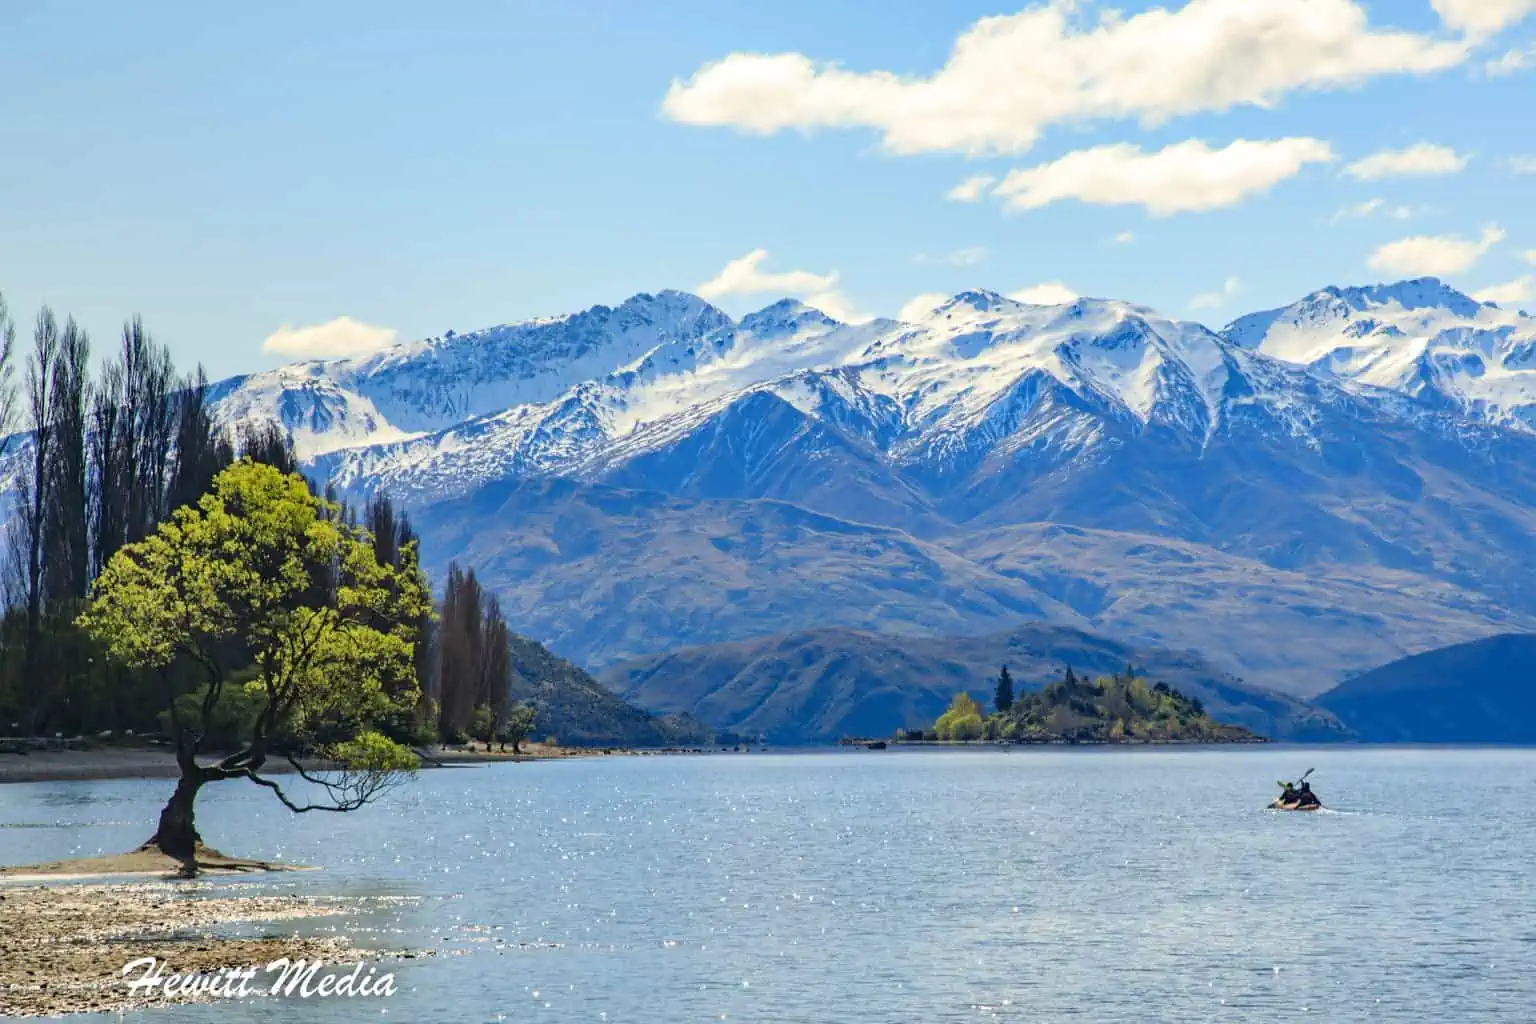 The Essential Wanaka New Zealand Guide